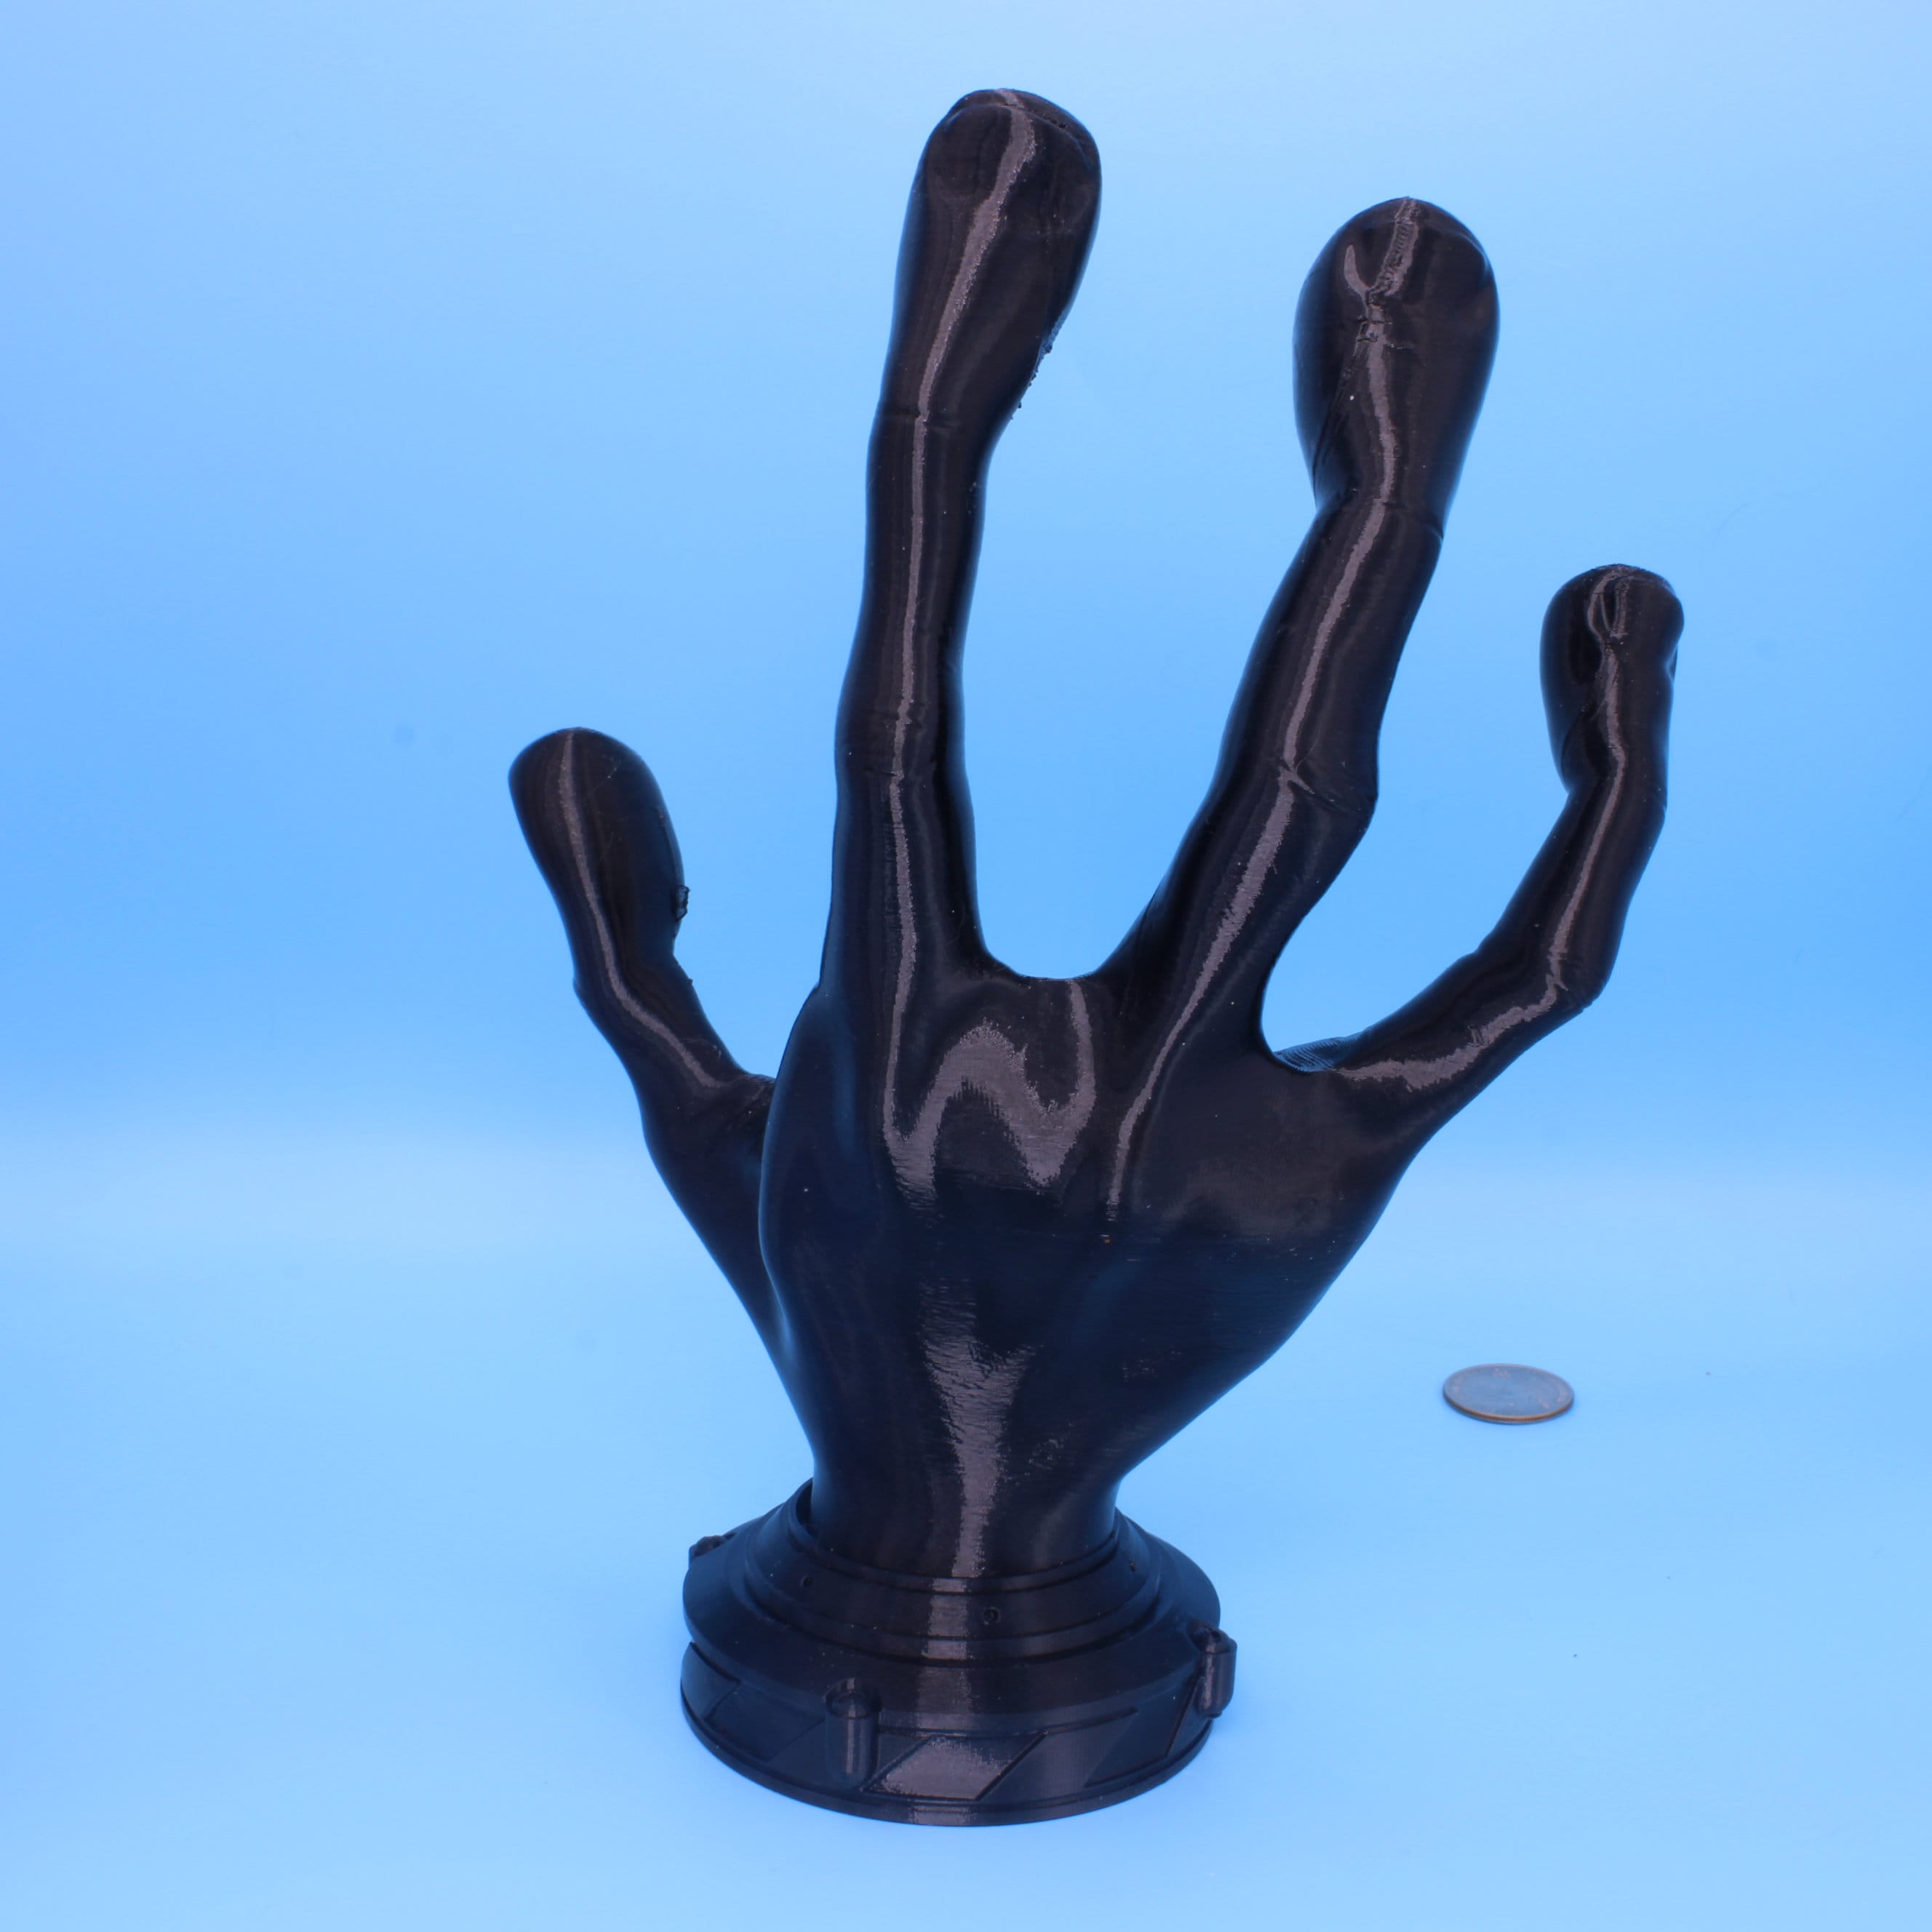 Game Controller Holder - 4 Finger Alien Hand. Over 100 Colors Available.